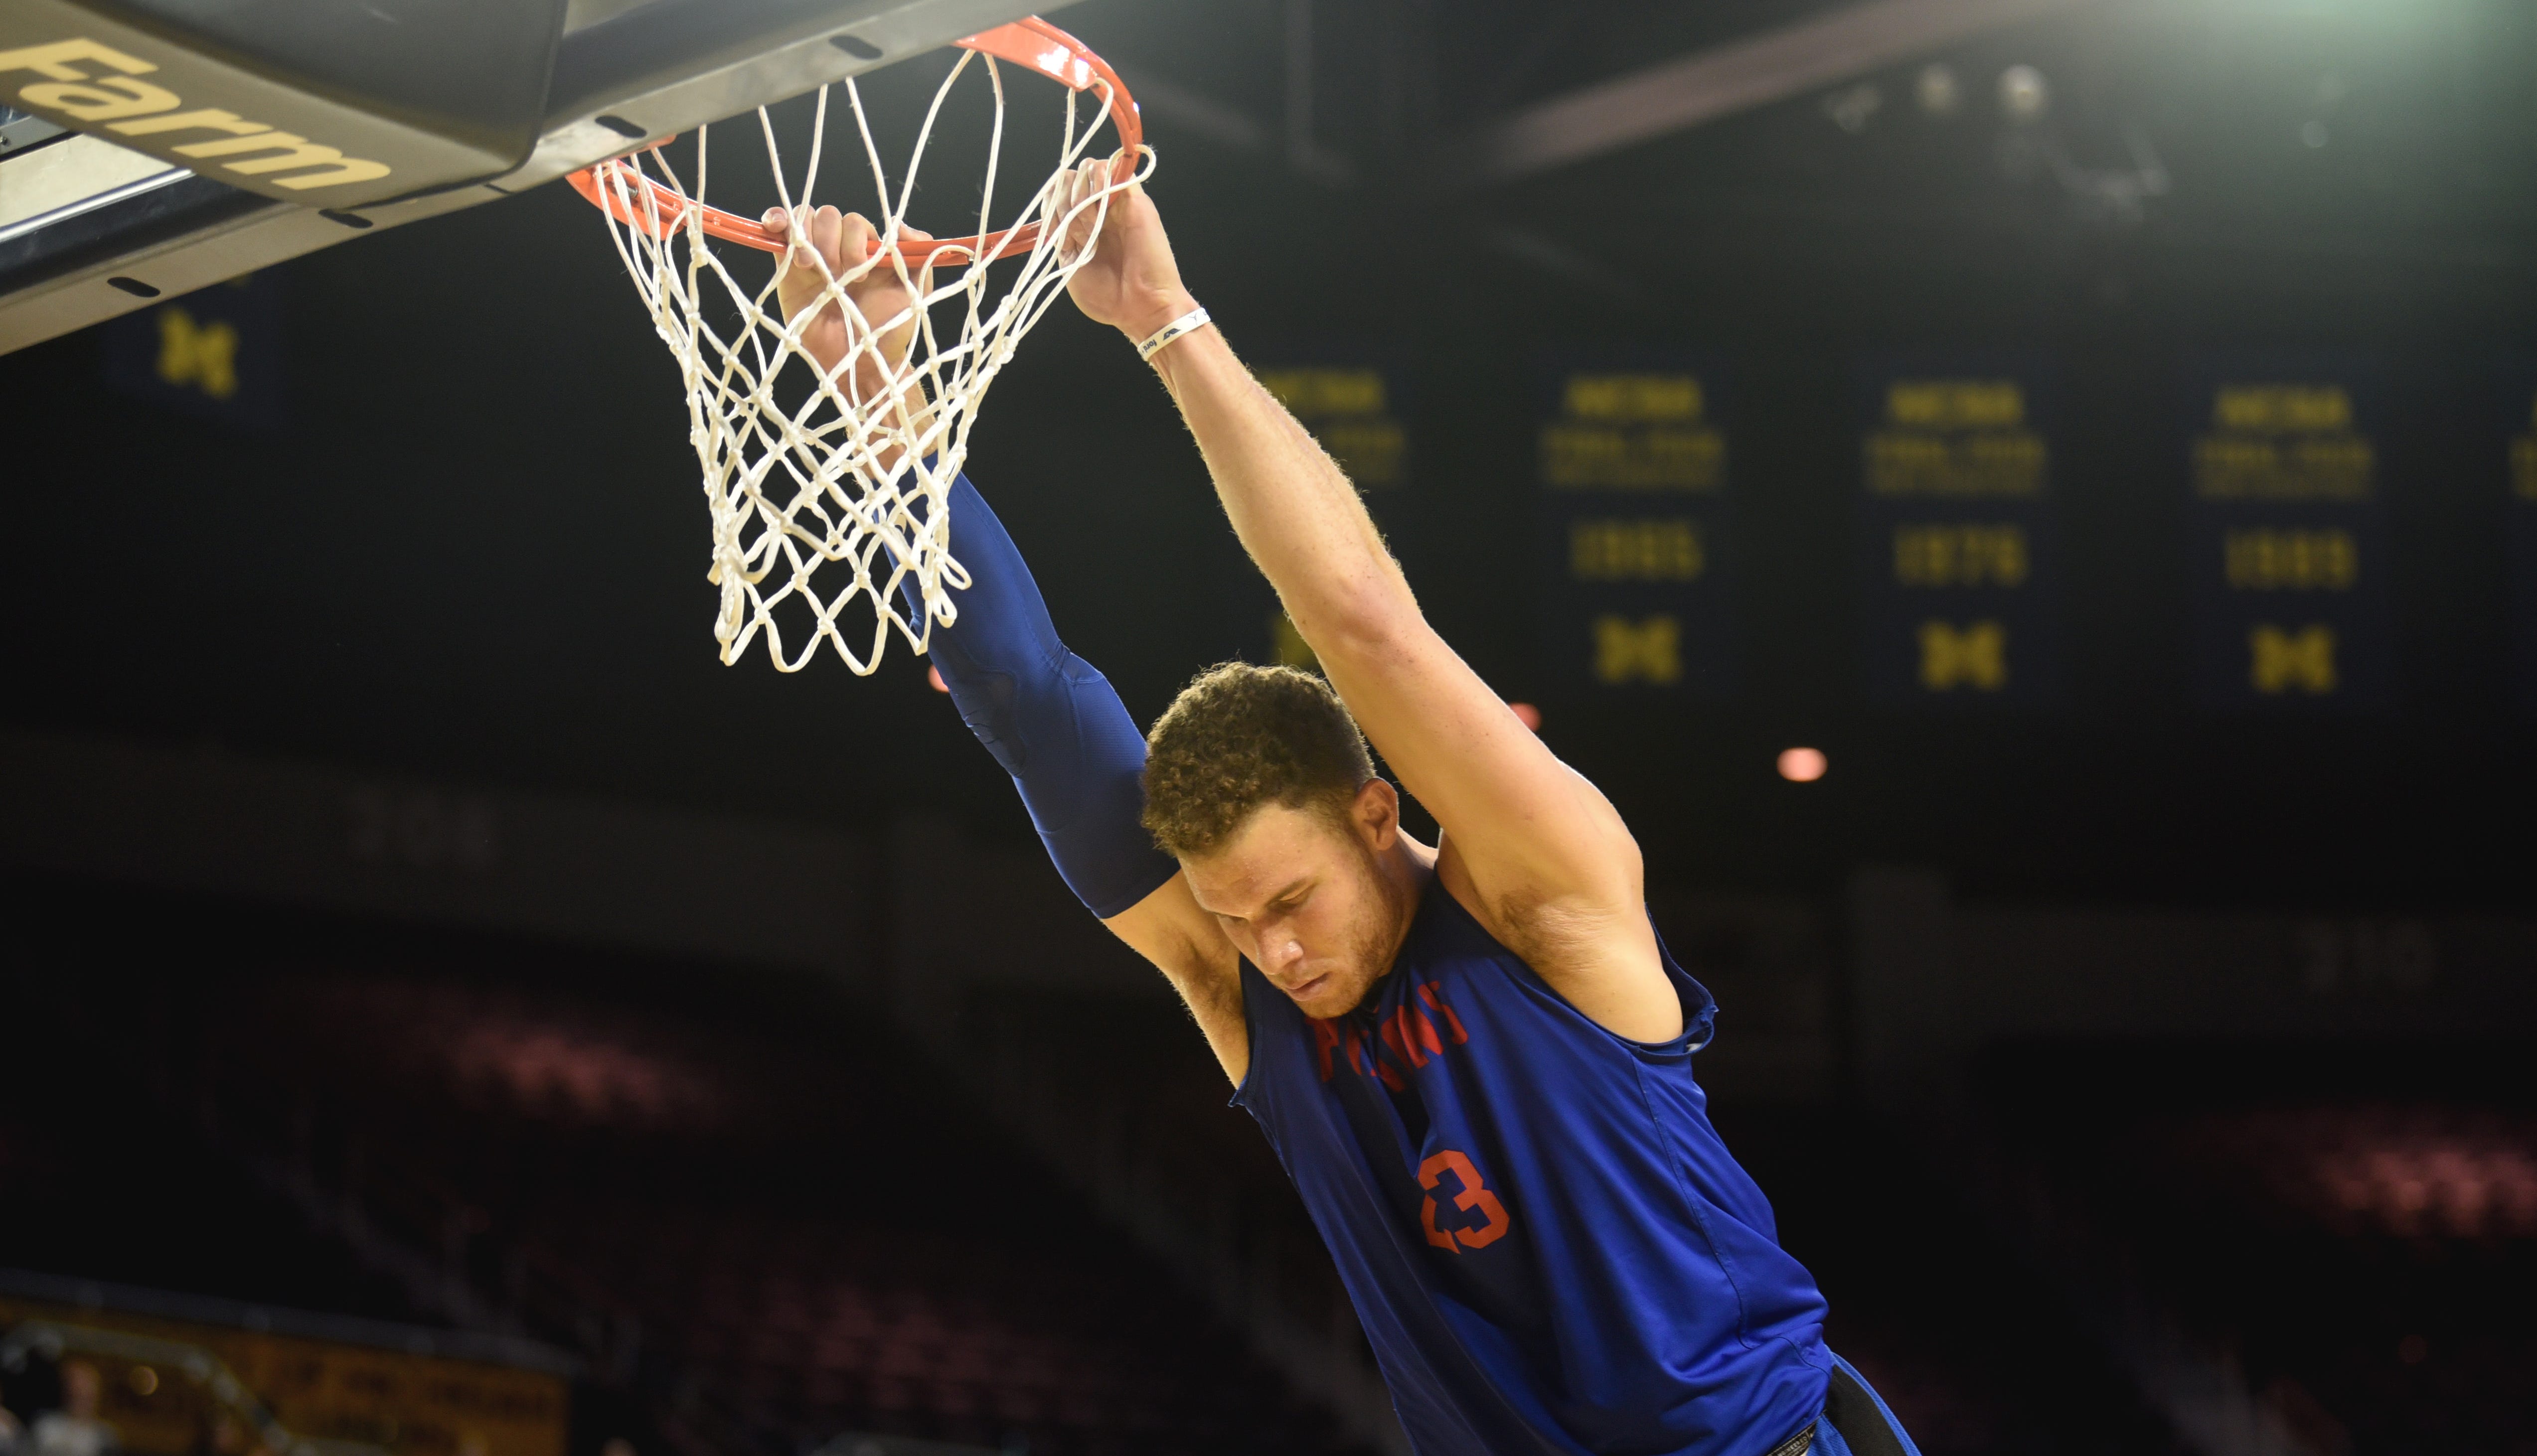 Blake Griffin swings from the rim after making a slam dunk.